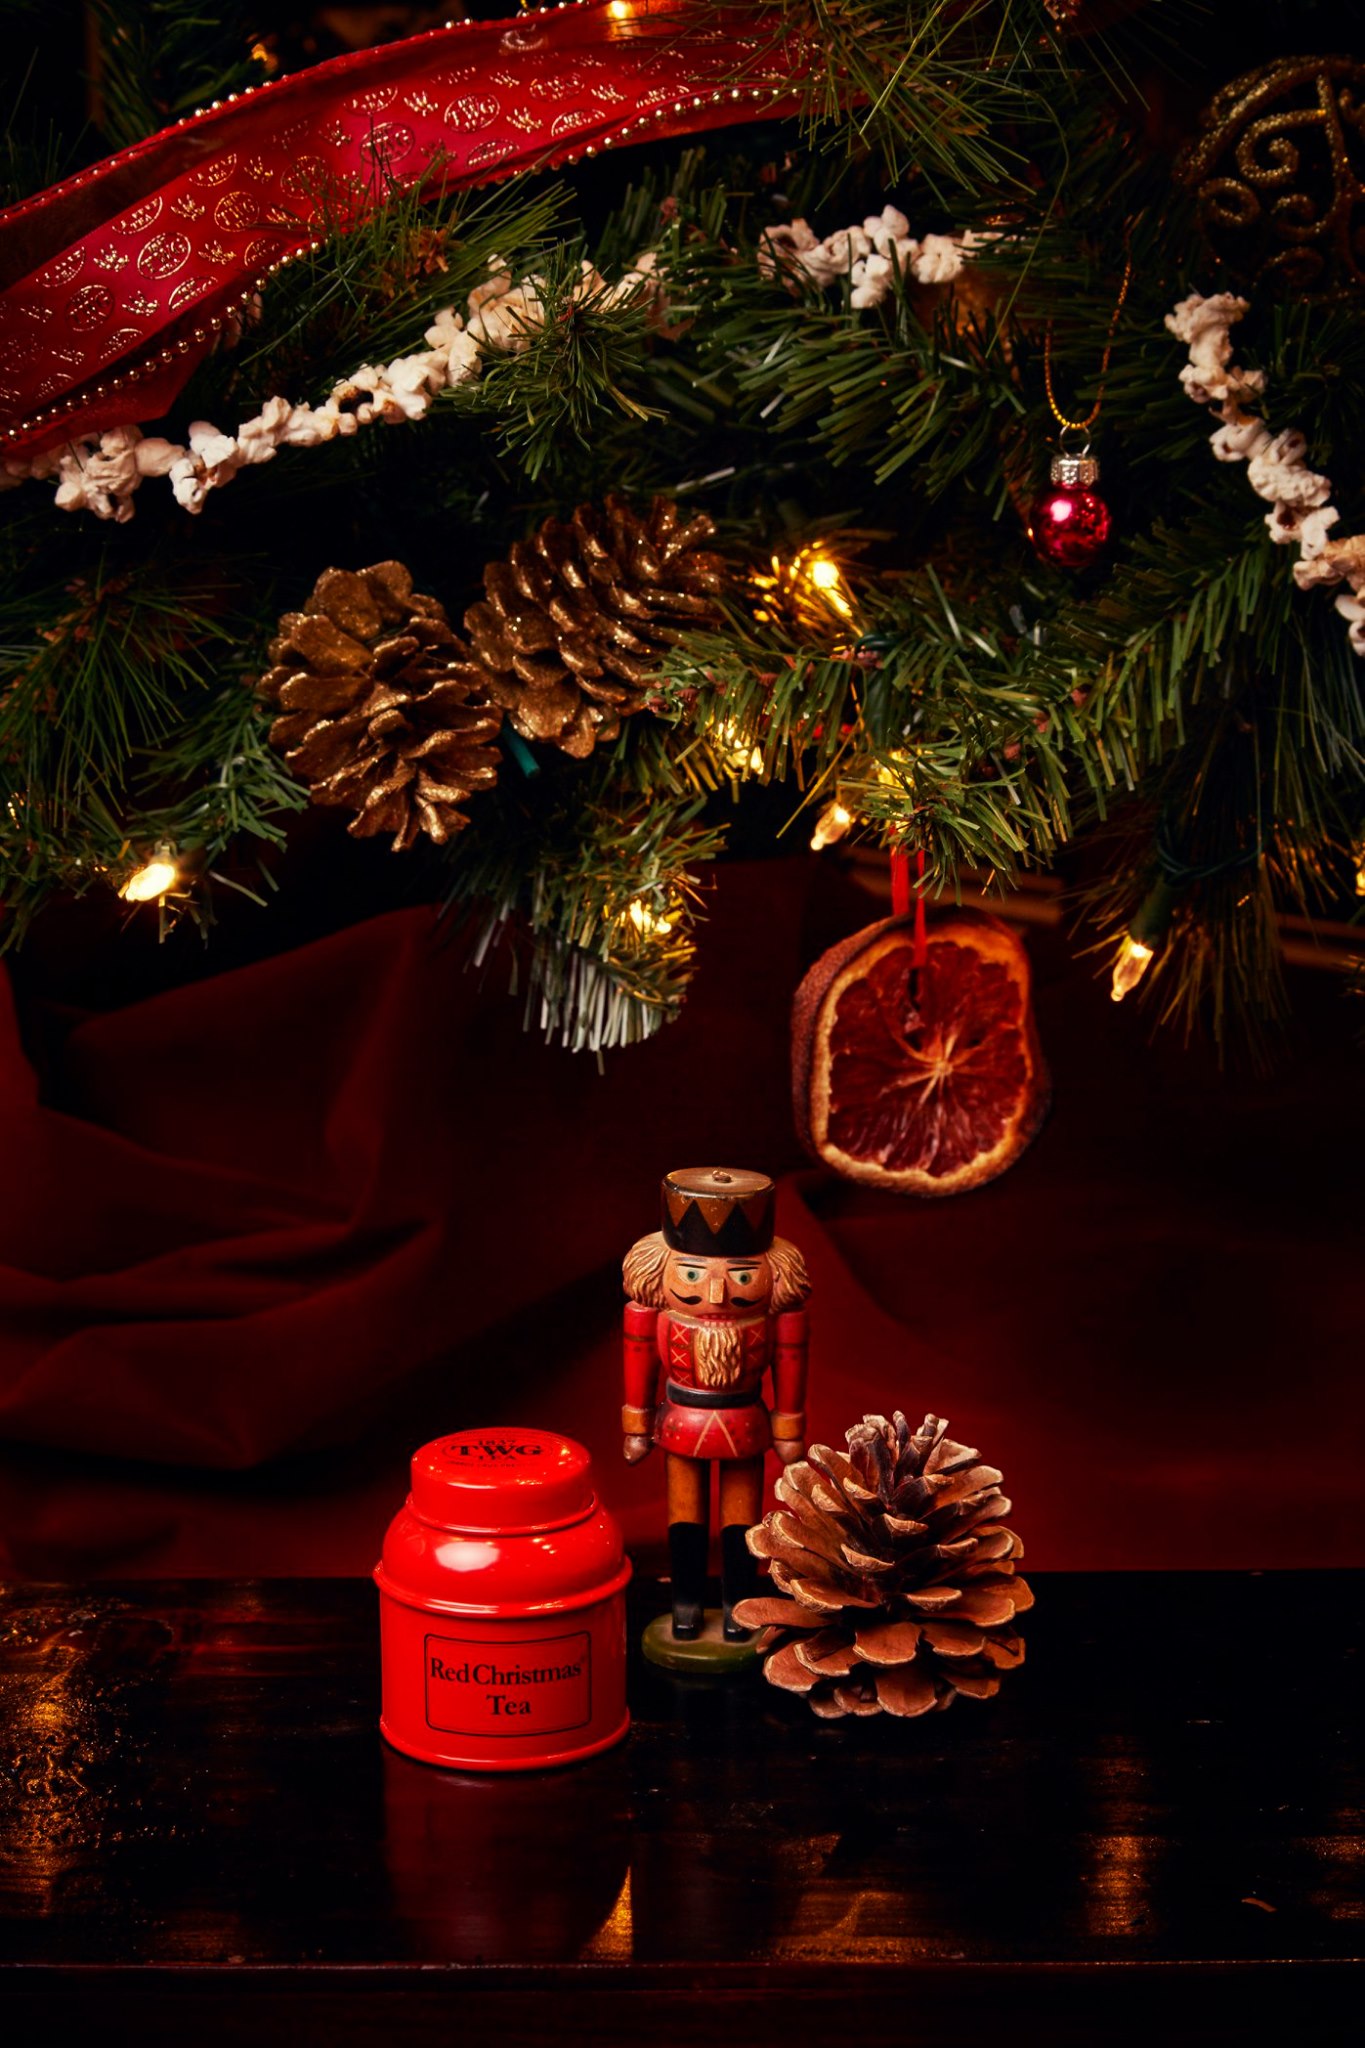 Purchase your Christmas gifts on TWGTea.com and receive a complimentary TWG Tea Red Christmas Tea Collectible from 21st - 24th November 2019. While stocks lasts.